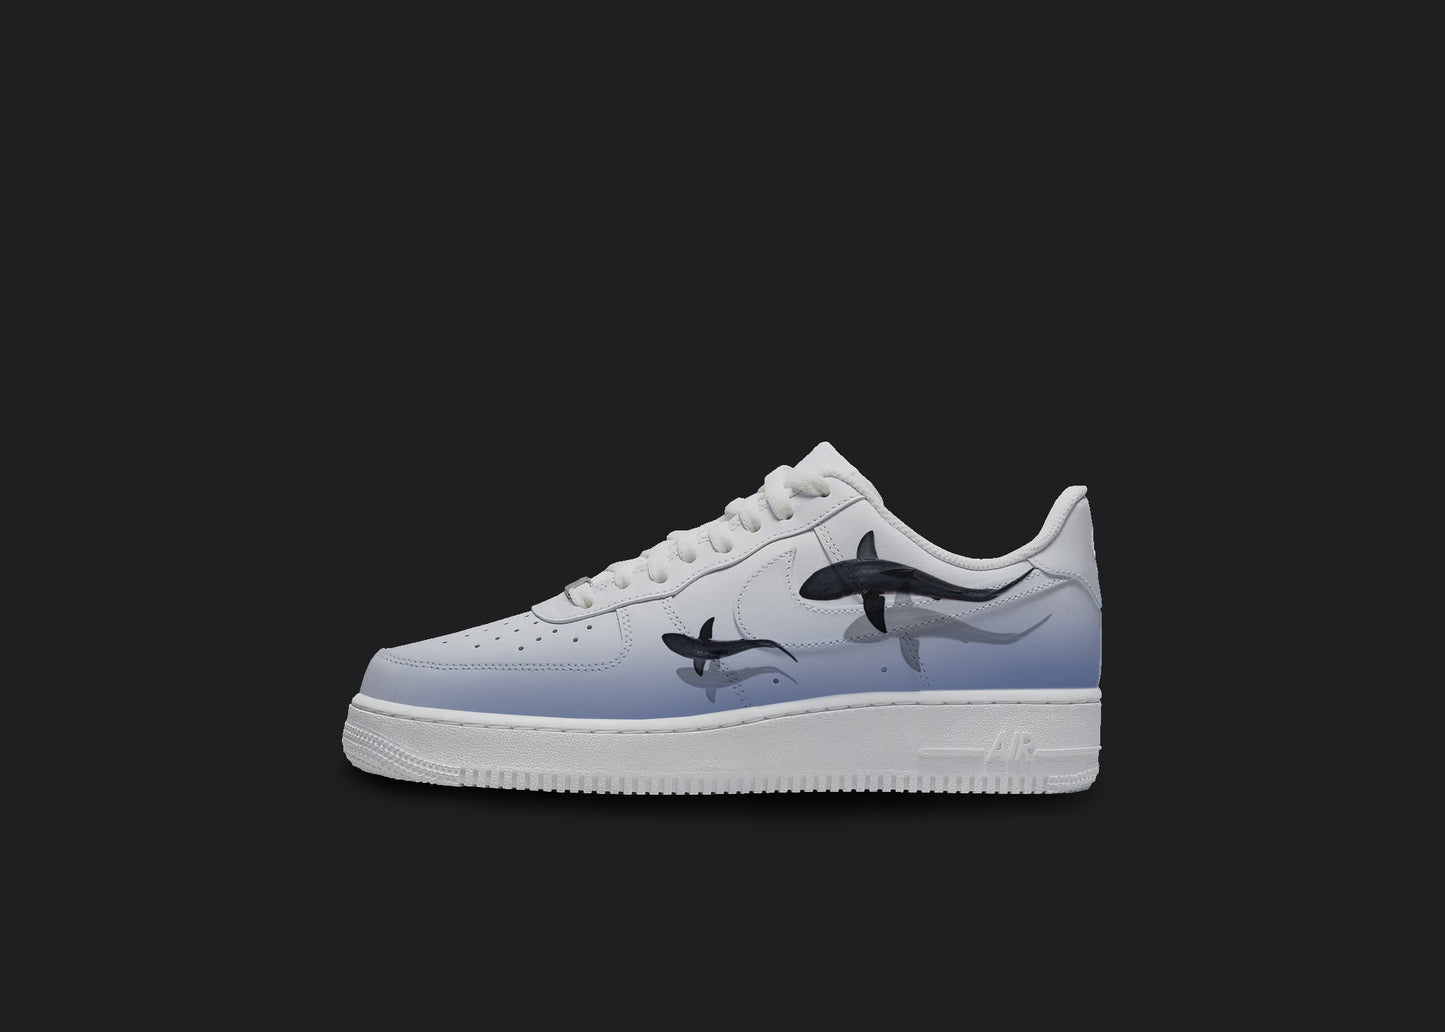 The image is of a Custom Nike Air force 1 sneaker on a blank black background. The white custom nike sneaker has a blue fade and 2 sharks swimming on the side. 